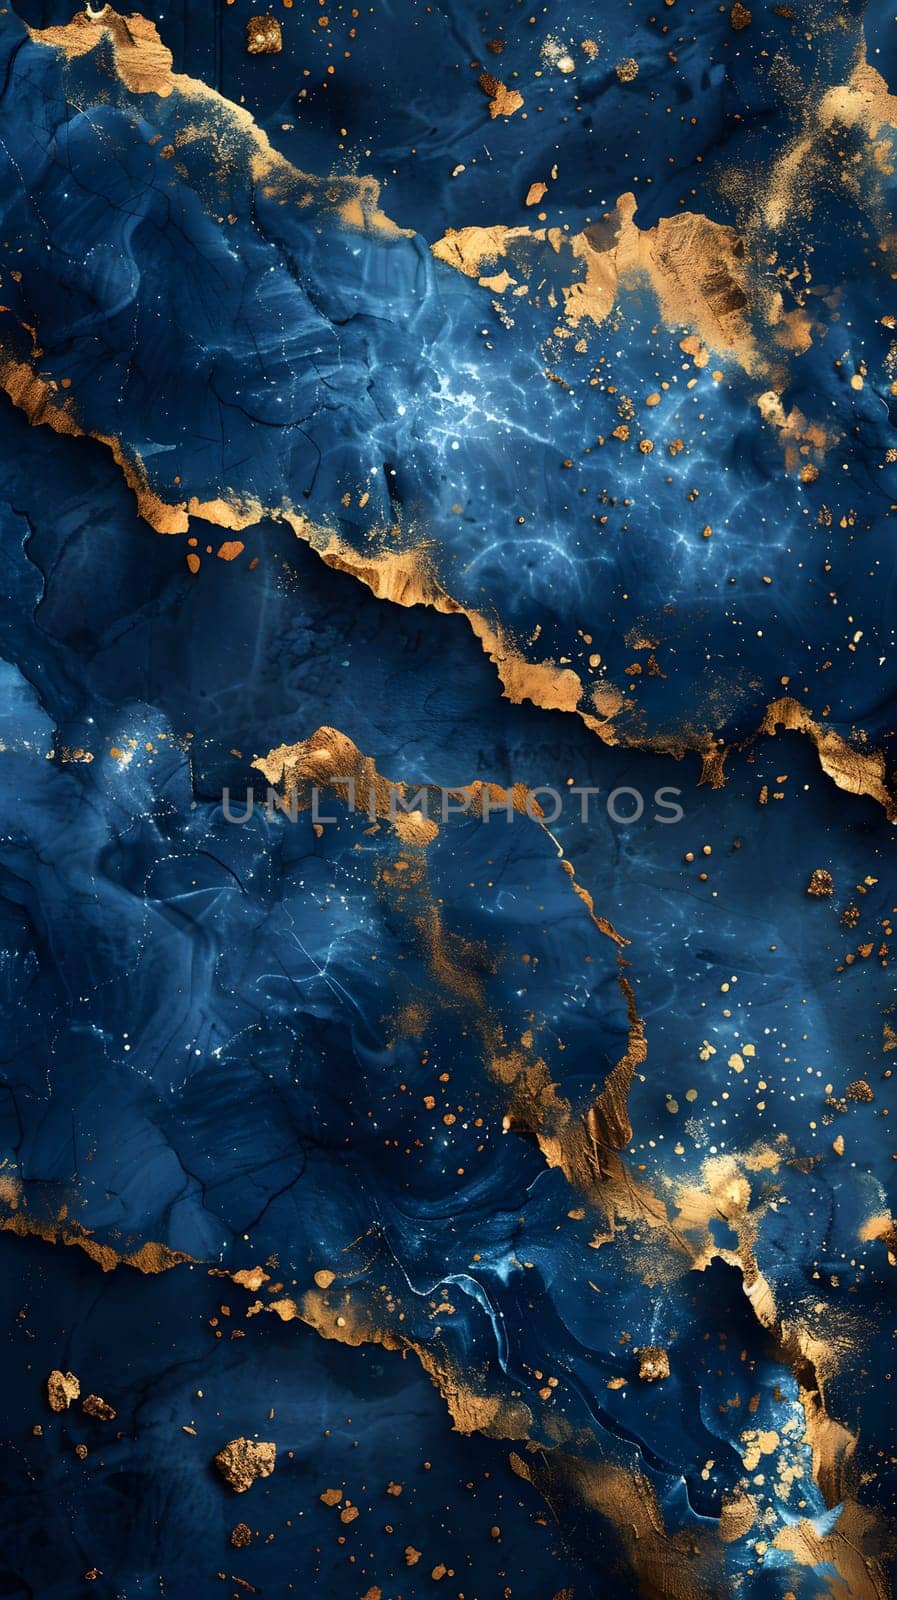 A close up of a swirling blue and gold marble texture resembling an electric blue pattern of a liquid atmosphere in a natural landscape